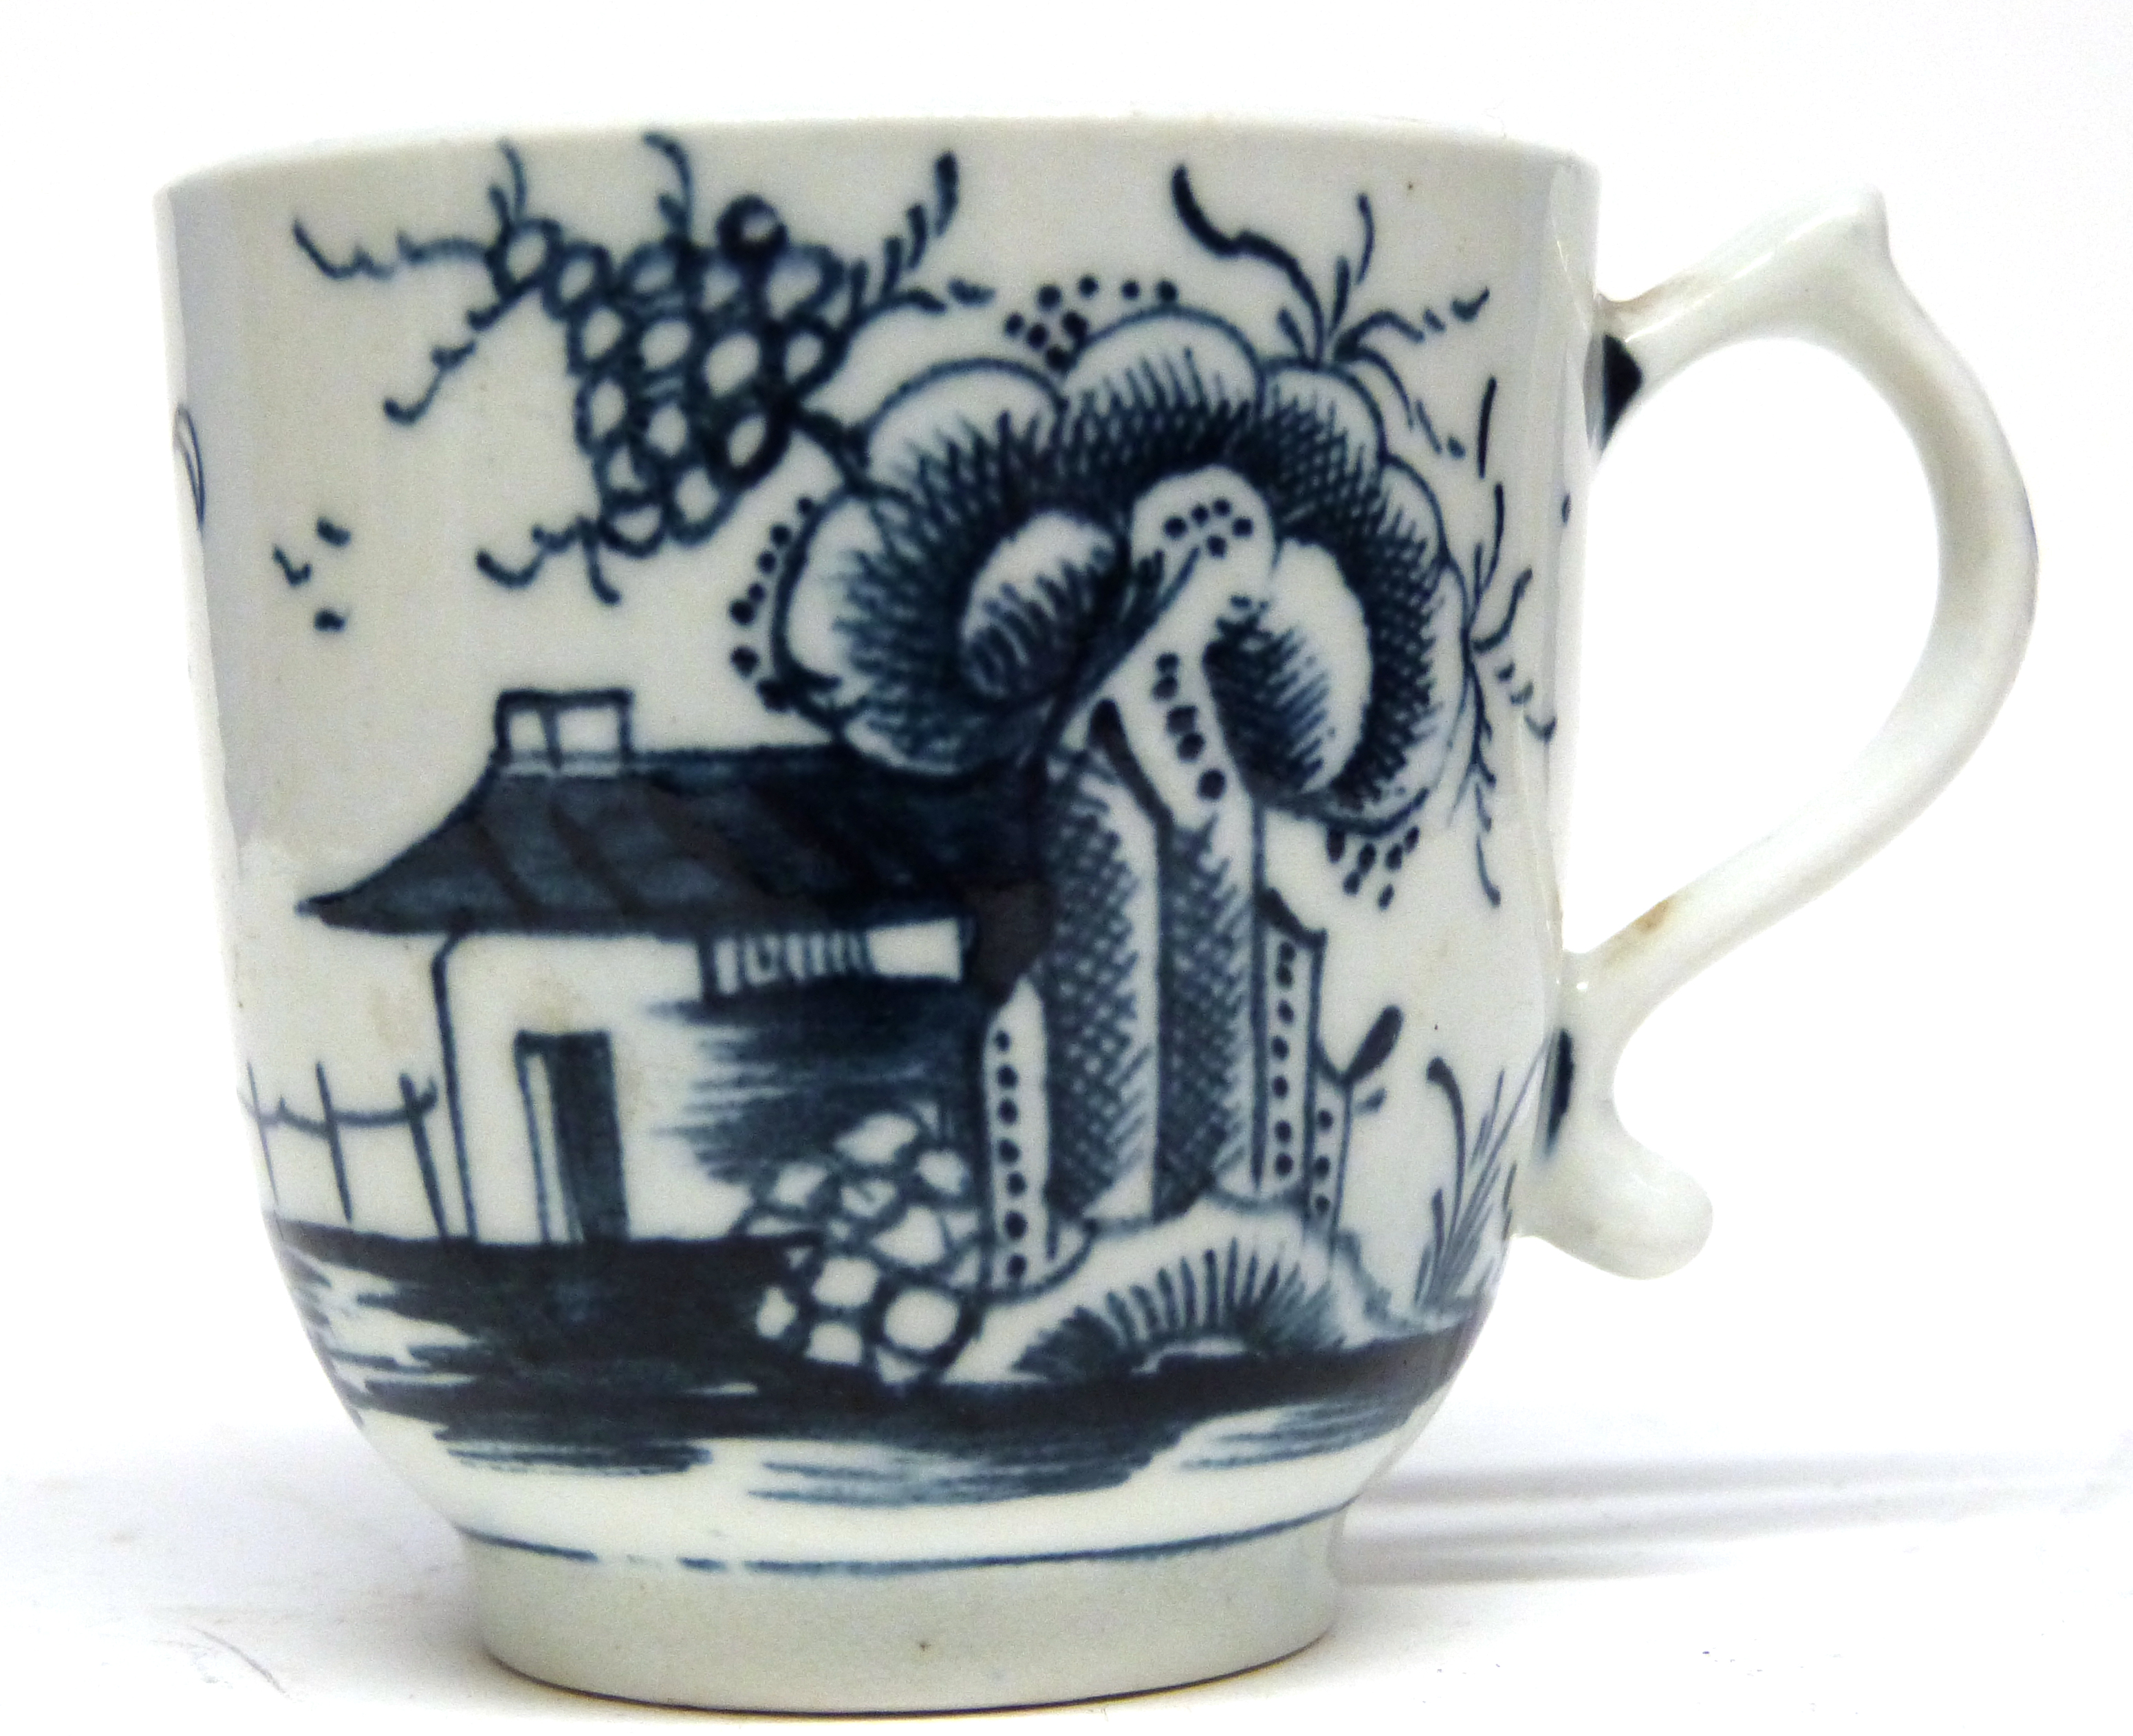 Lowestoft porcelain cup with kick handle, decorated with the long fence pattern, in a bright tone of